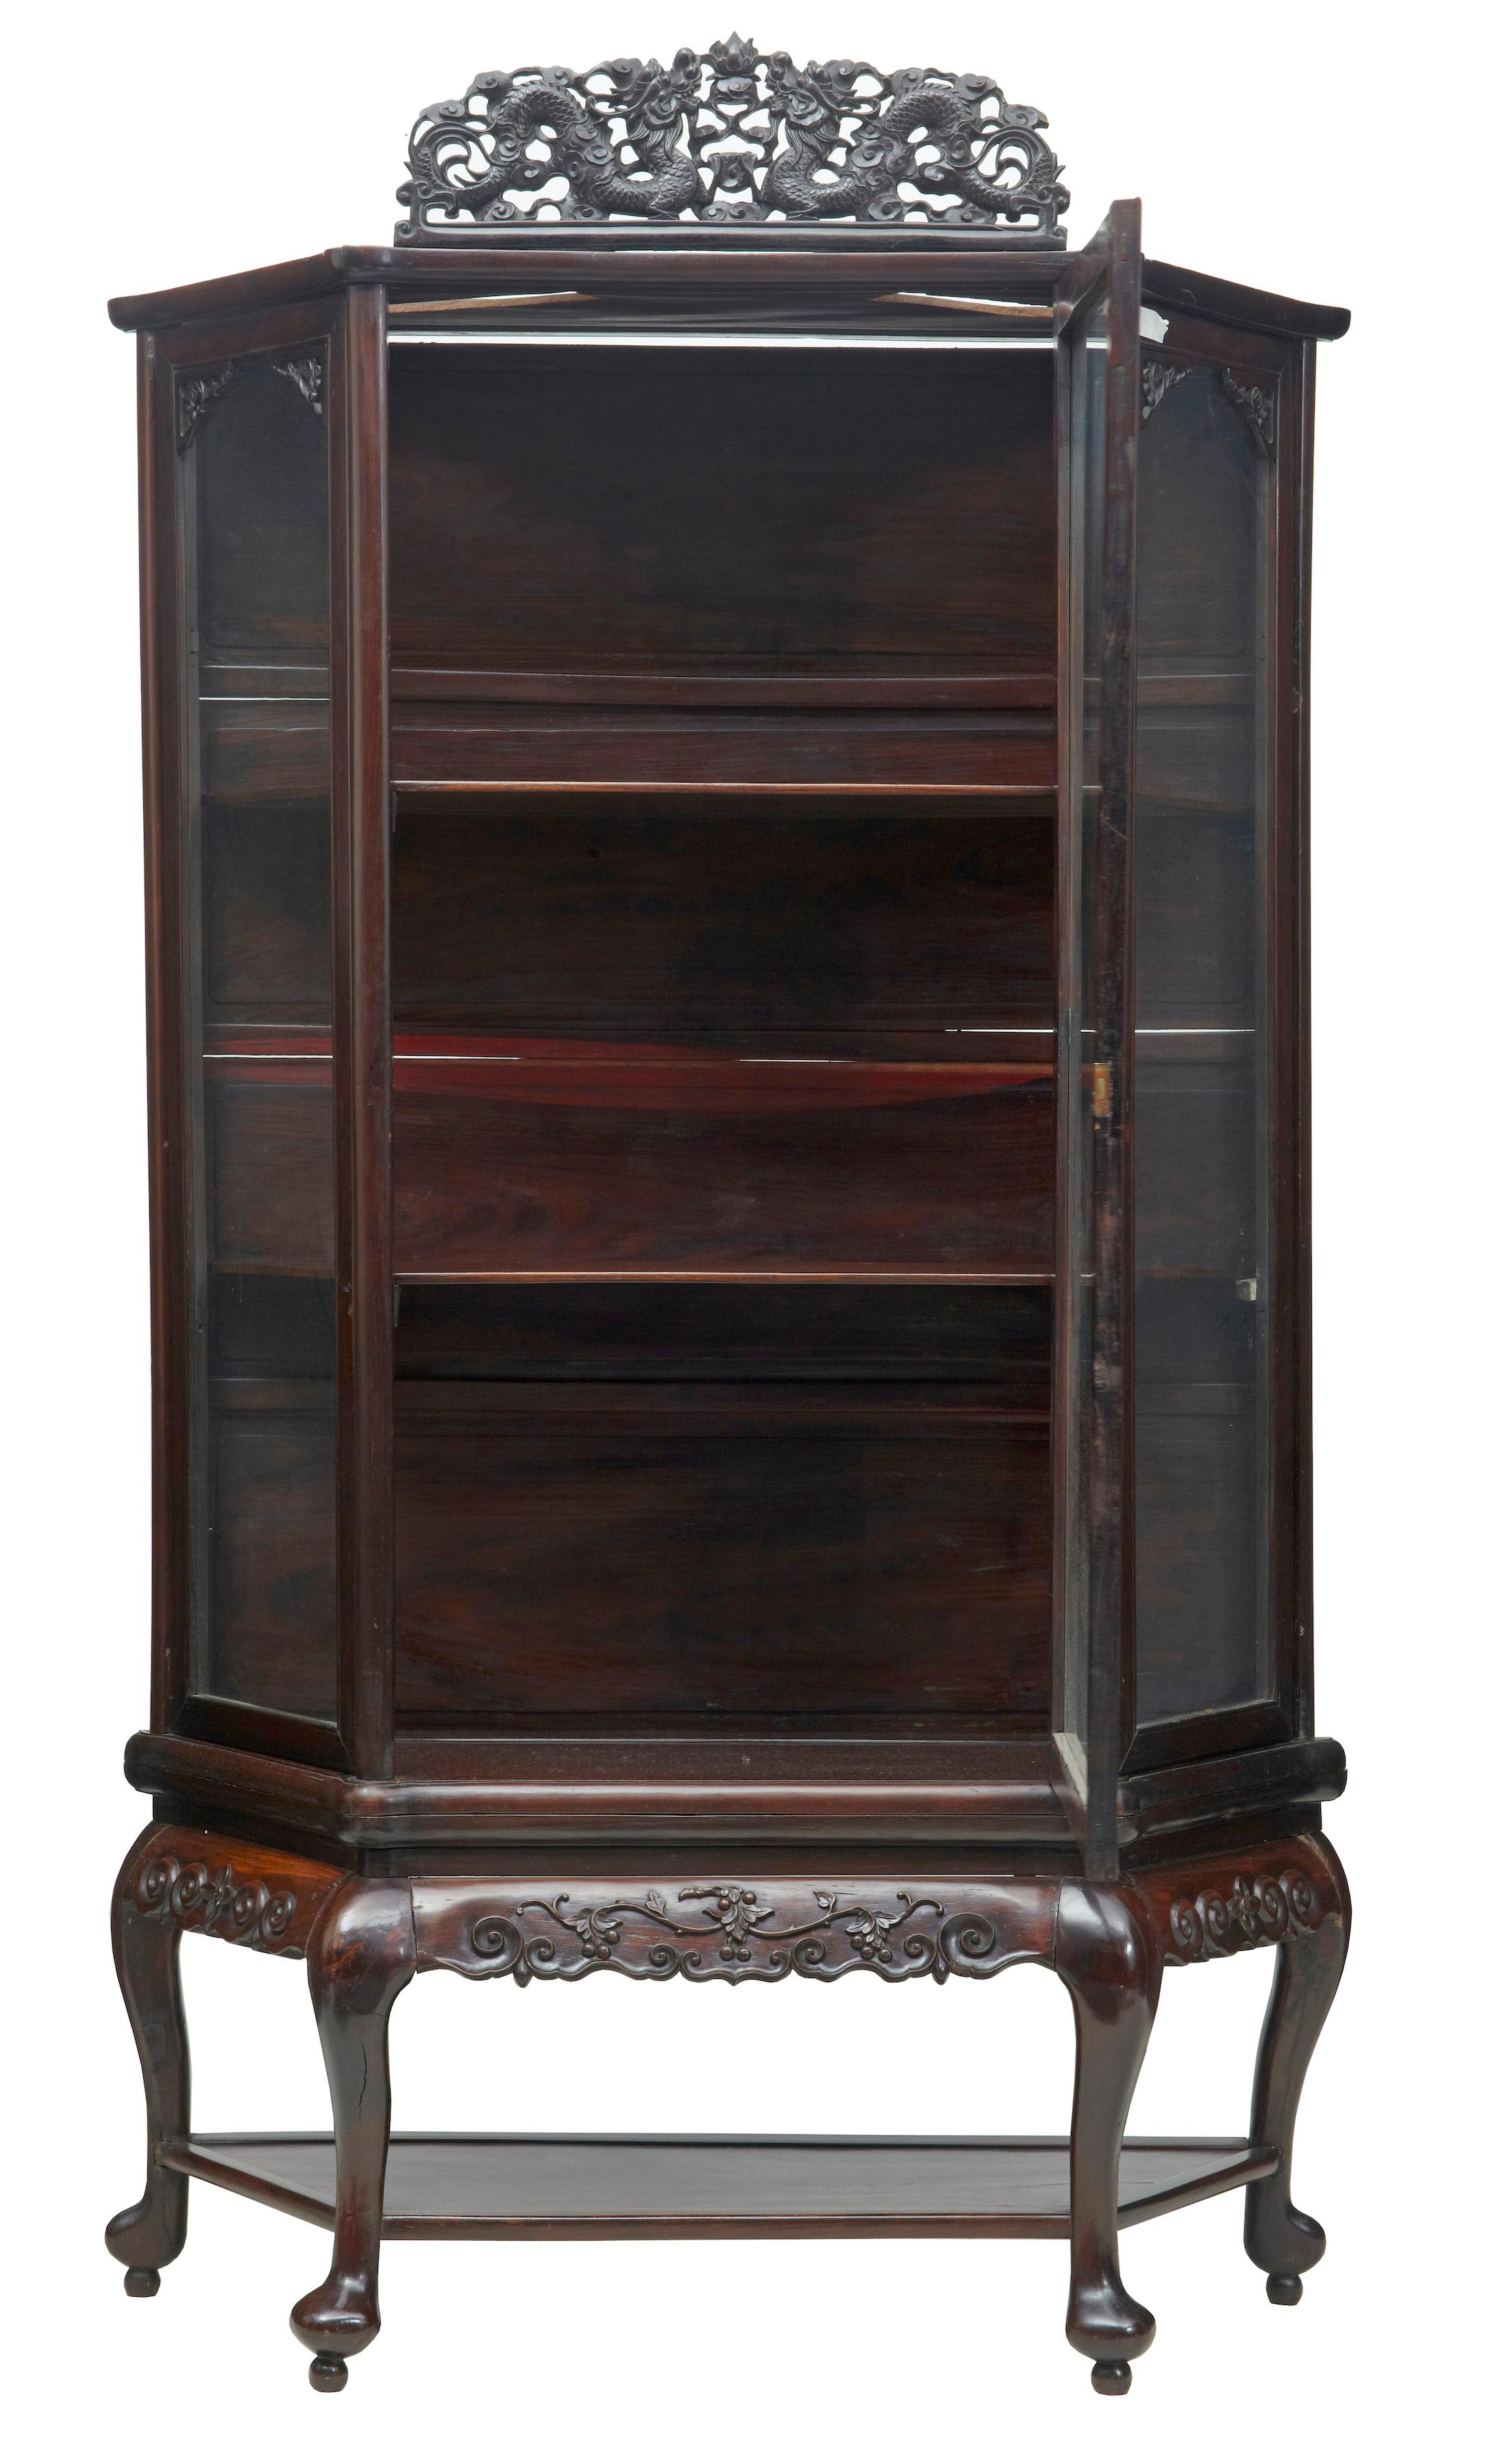 19th century Chinese carved hardwood glazed display cabinet, circa 1890

Single large glazed door opens to 2 shelves, stands on 4 shaped legs united by a shelf. Detachable pierced carving of dragons to the top, this would have been flanked either